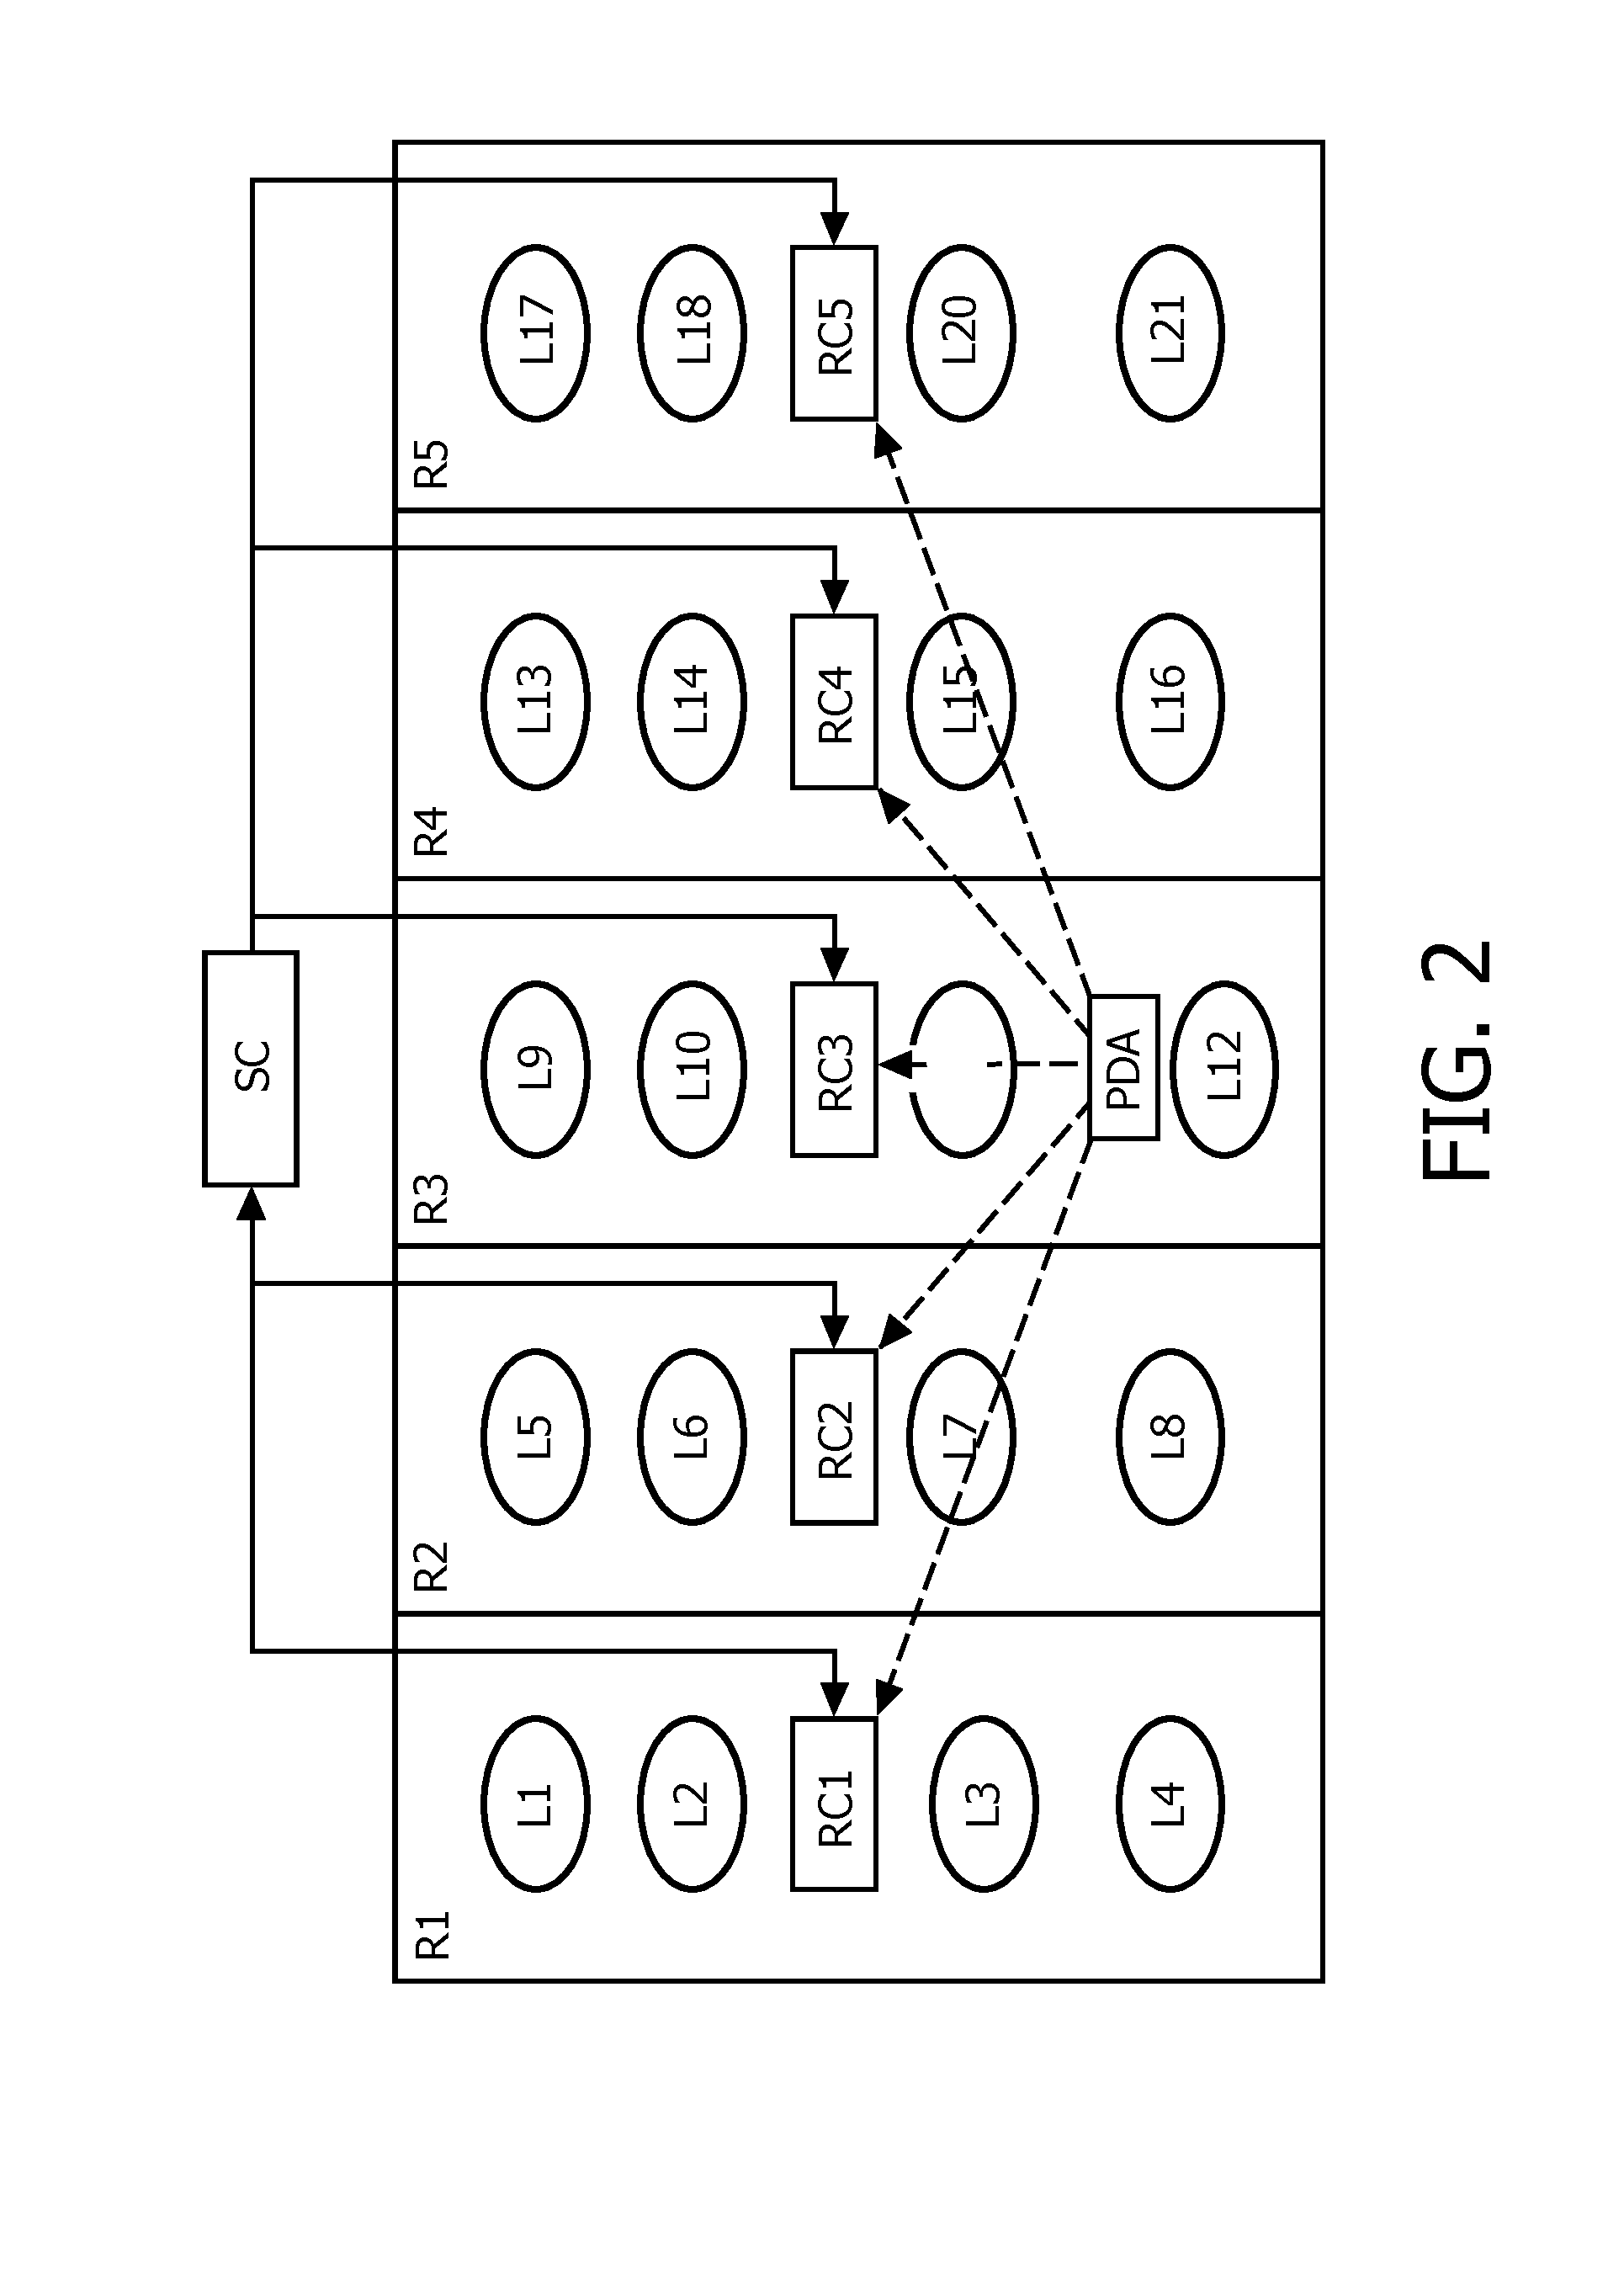 Methods for automatically commissioning of devices of a networked control system